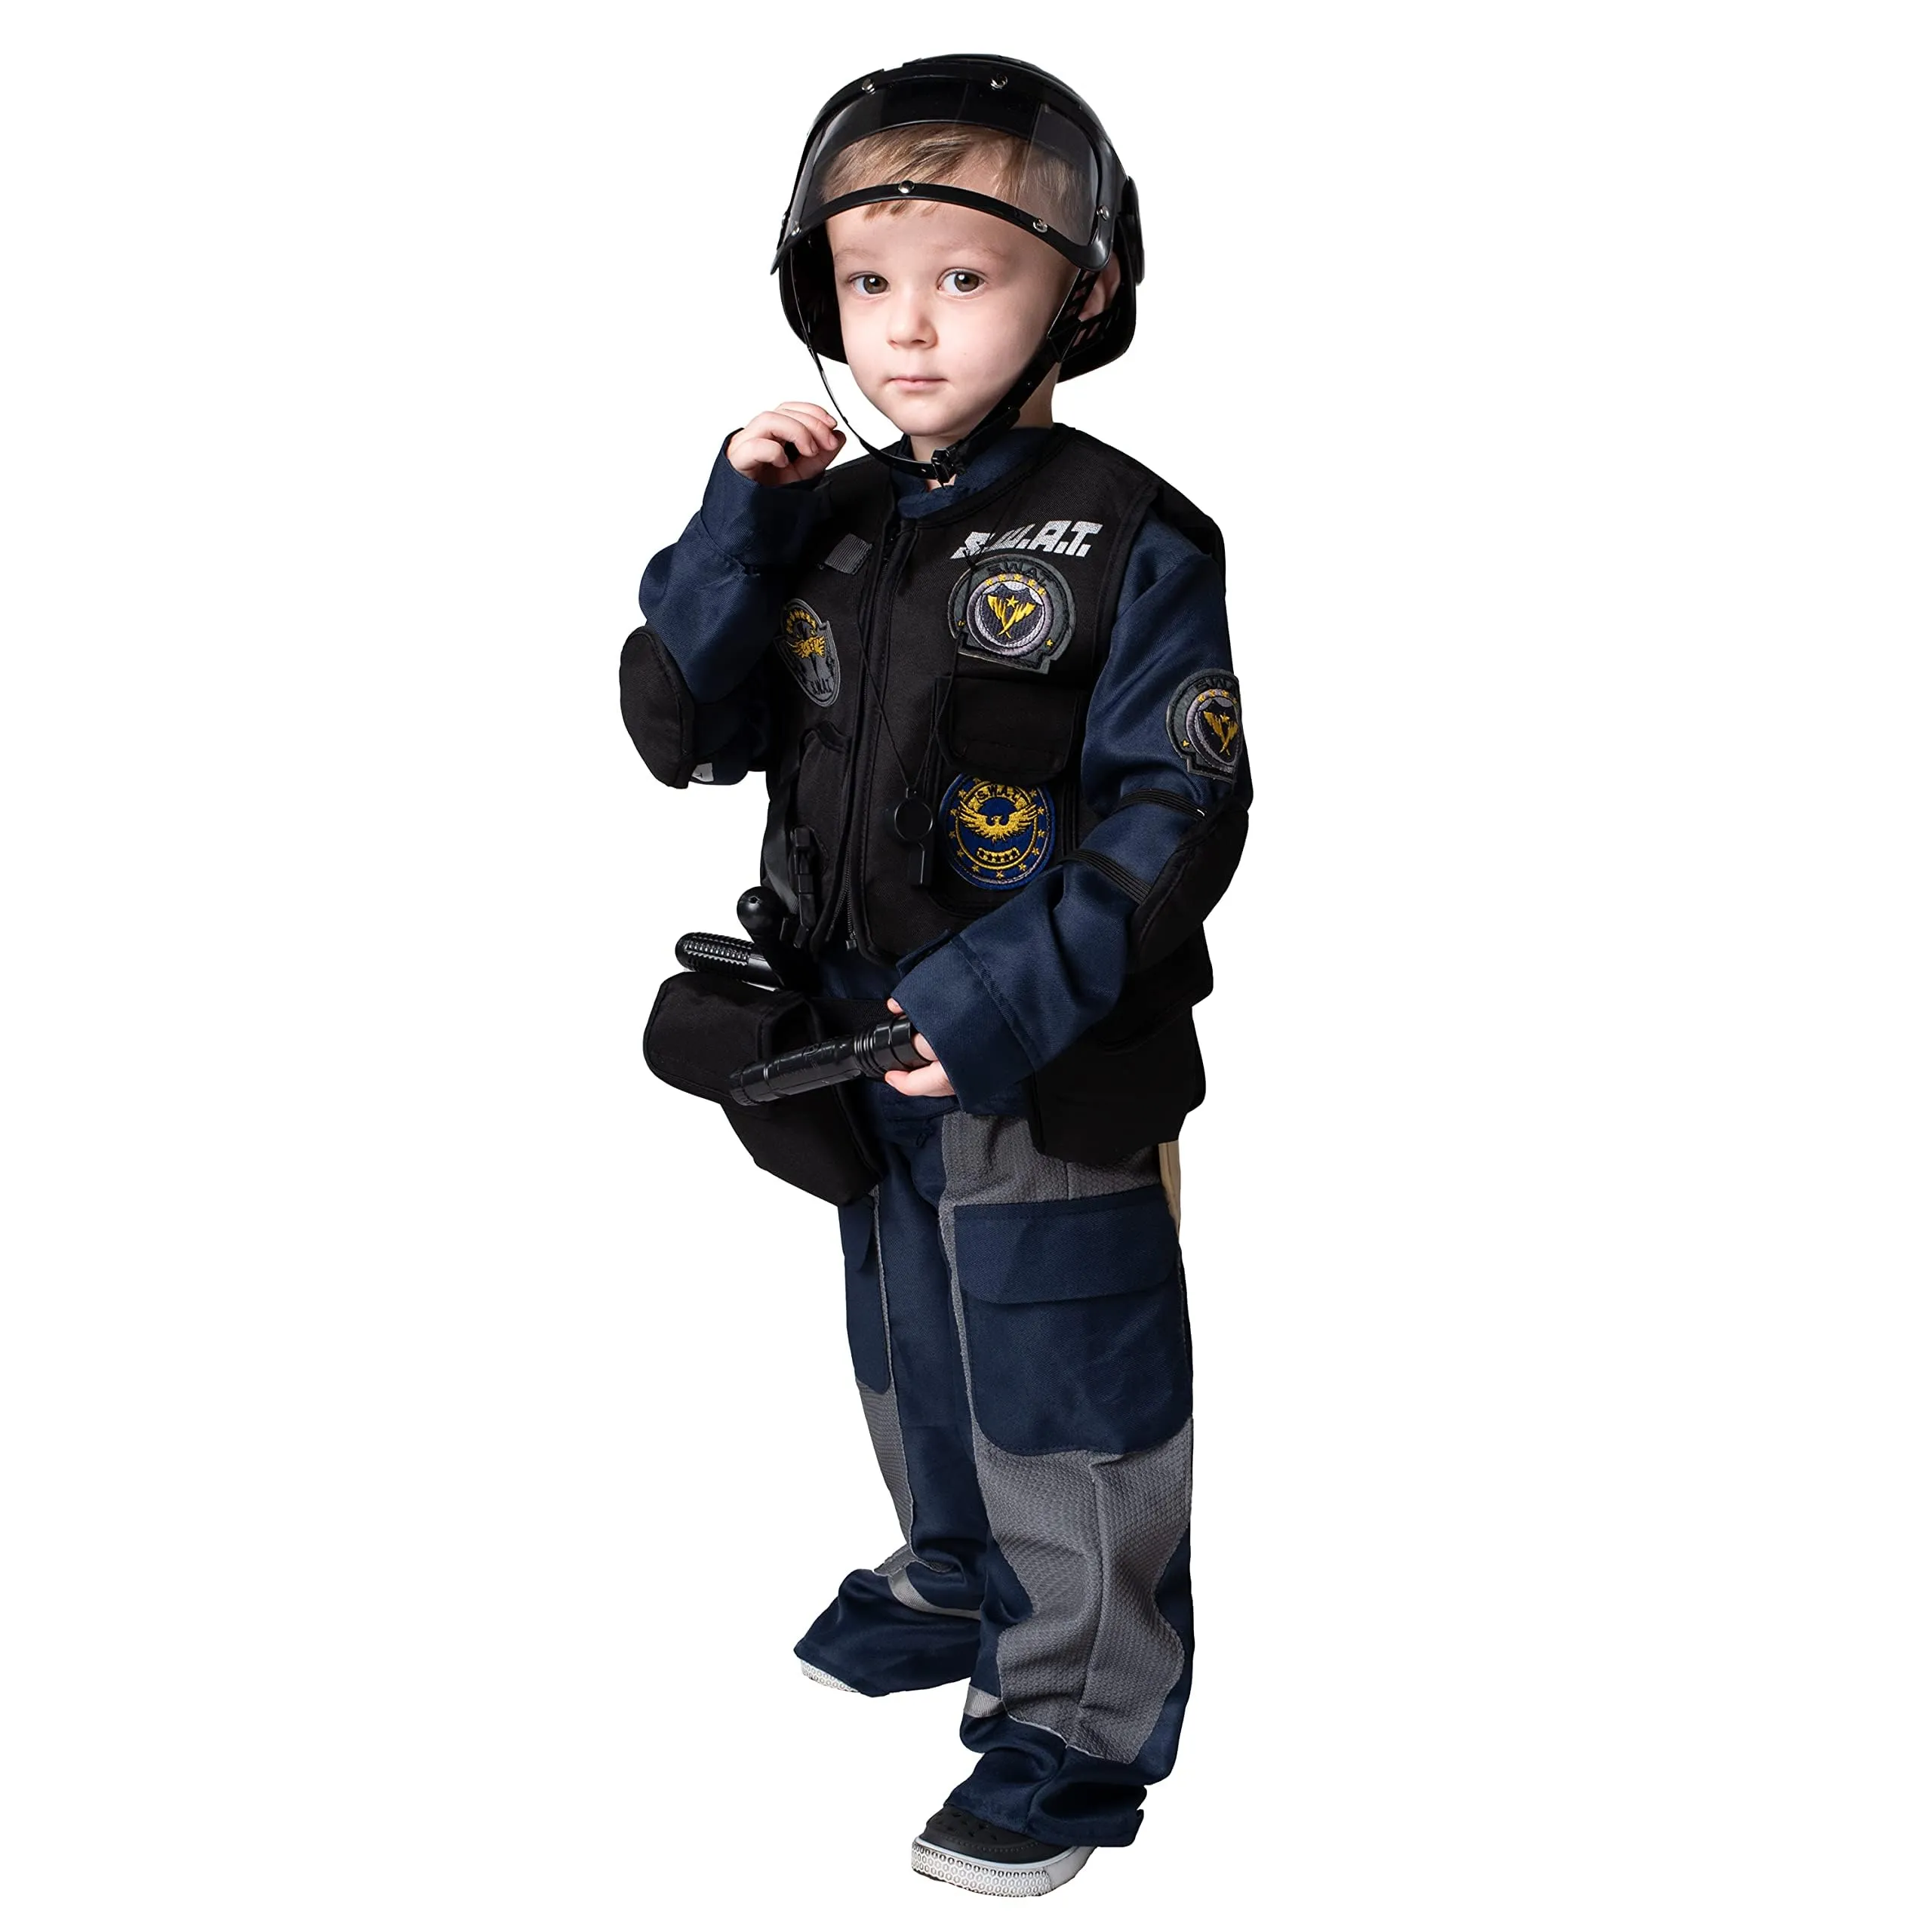 High Quality Kids Police Officer Halloween Costume